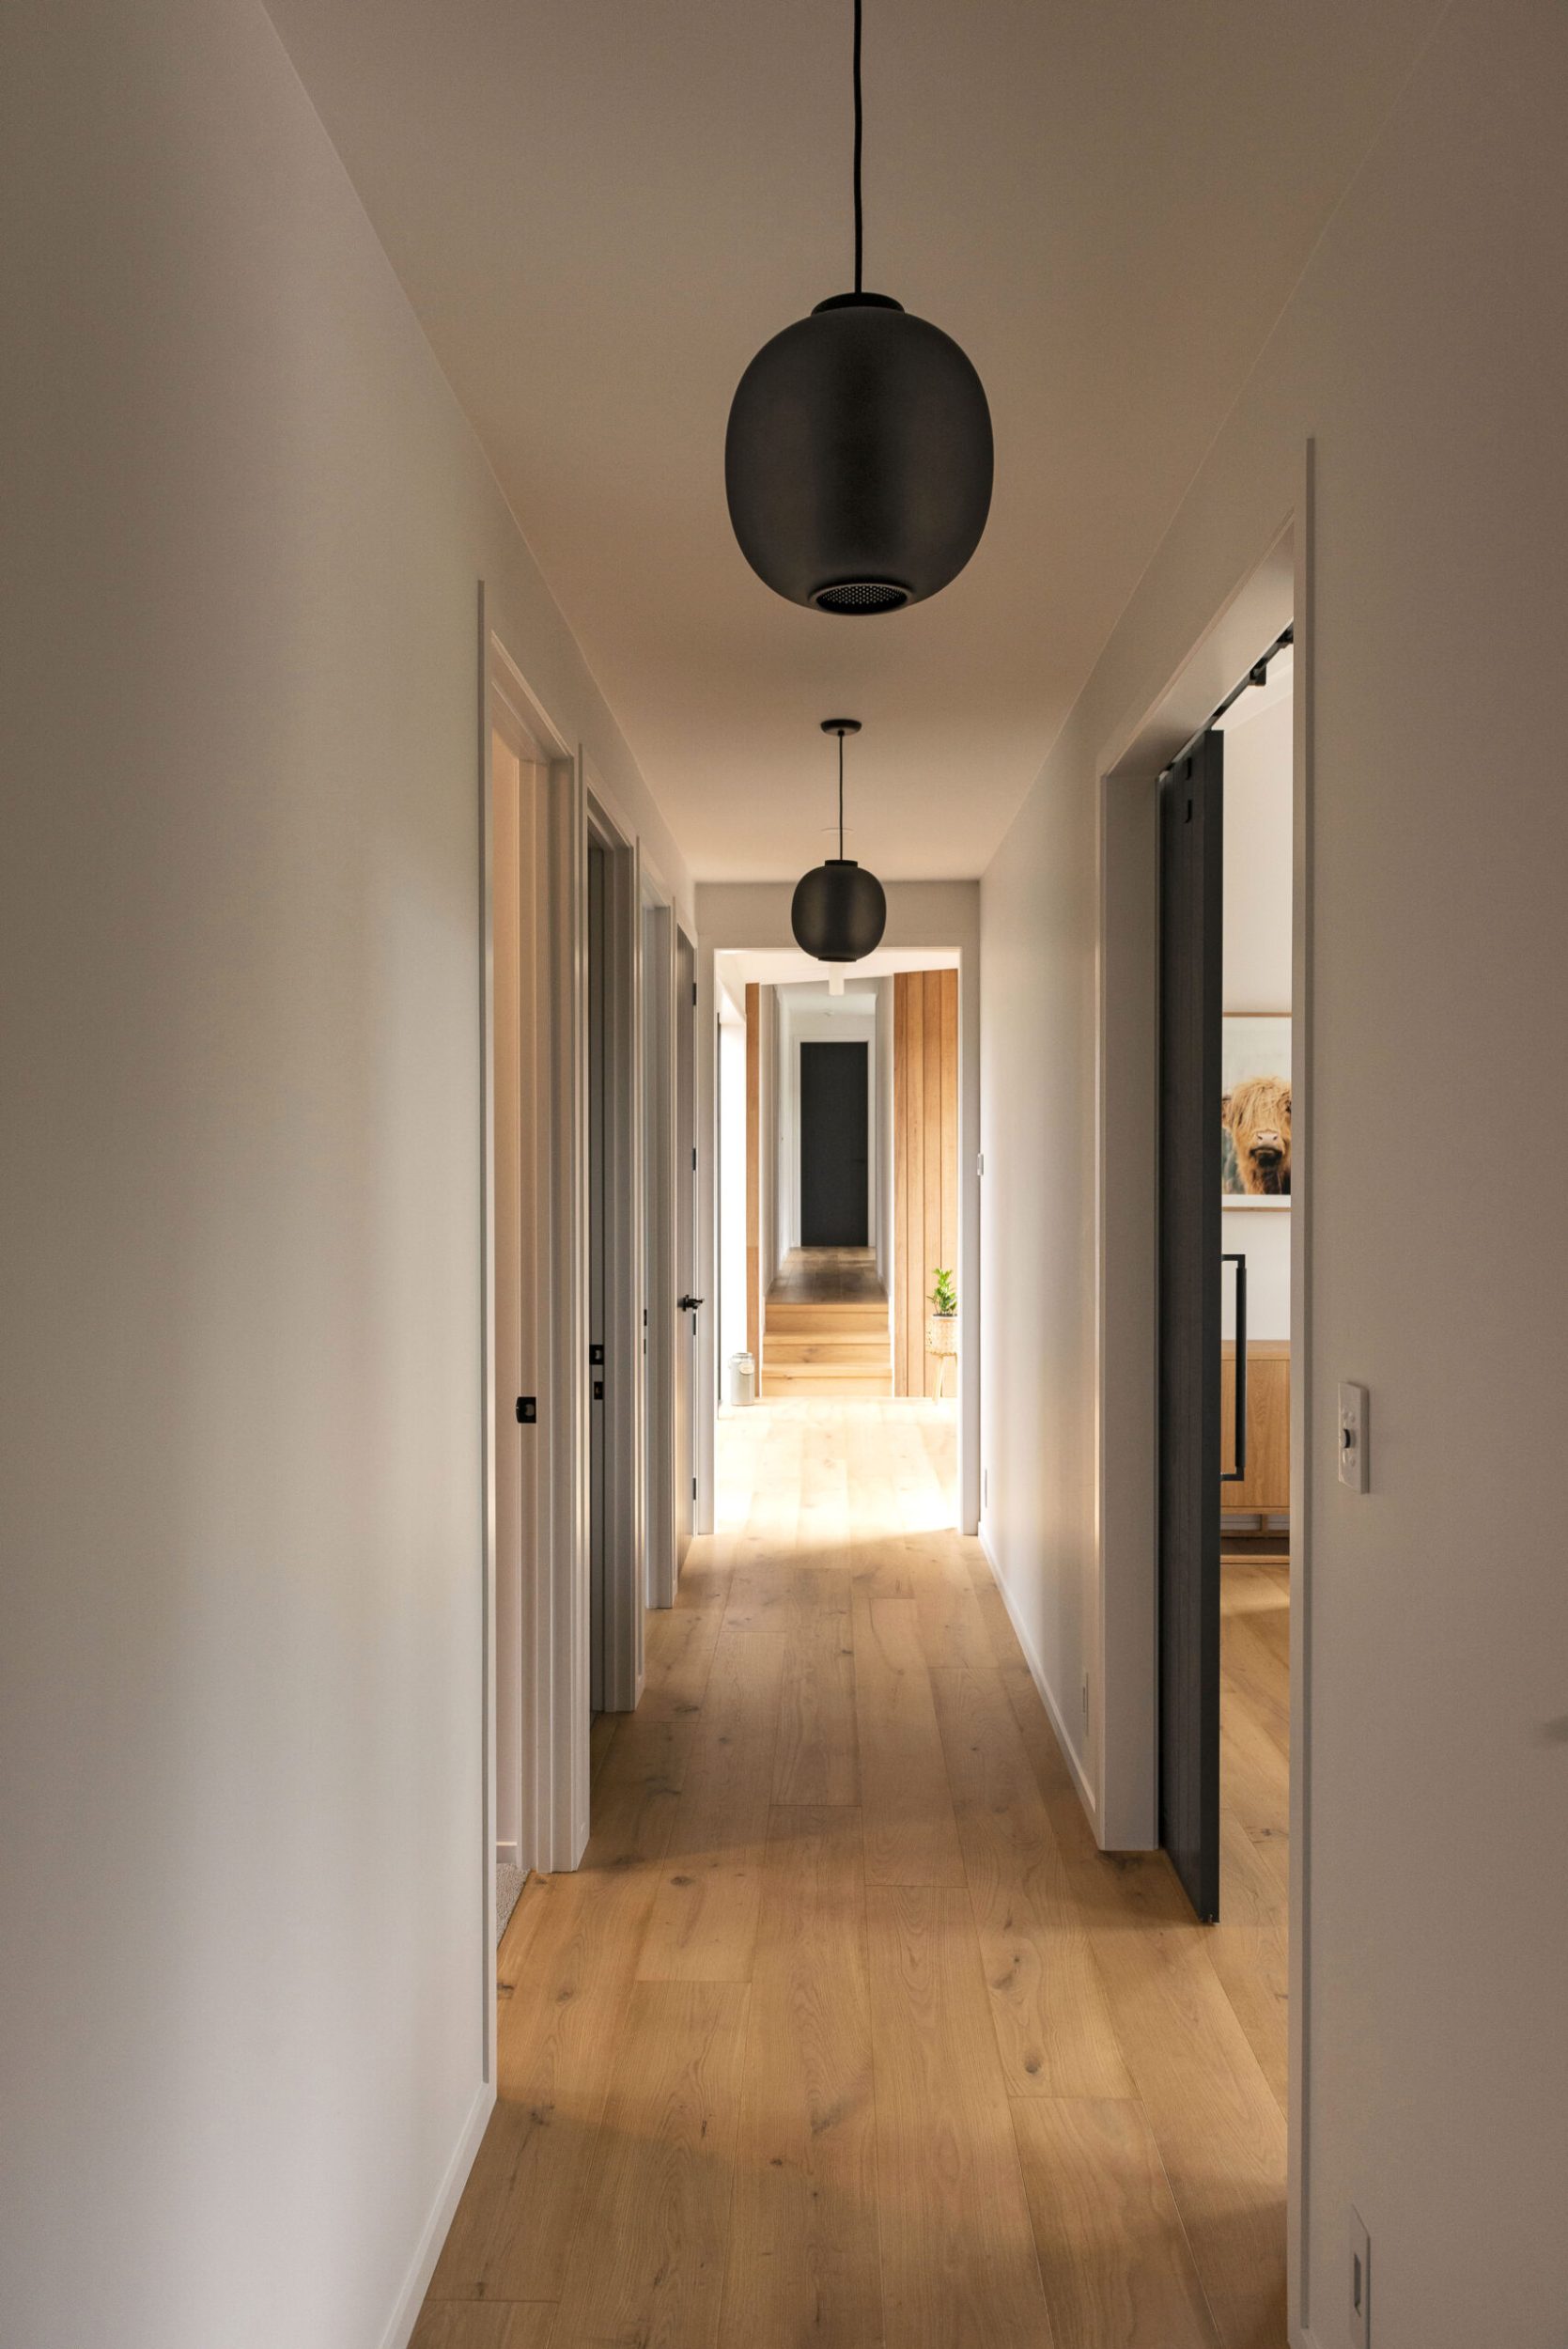 A long hallway with cream walls, wood floors, round black lamps 